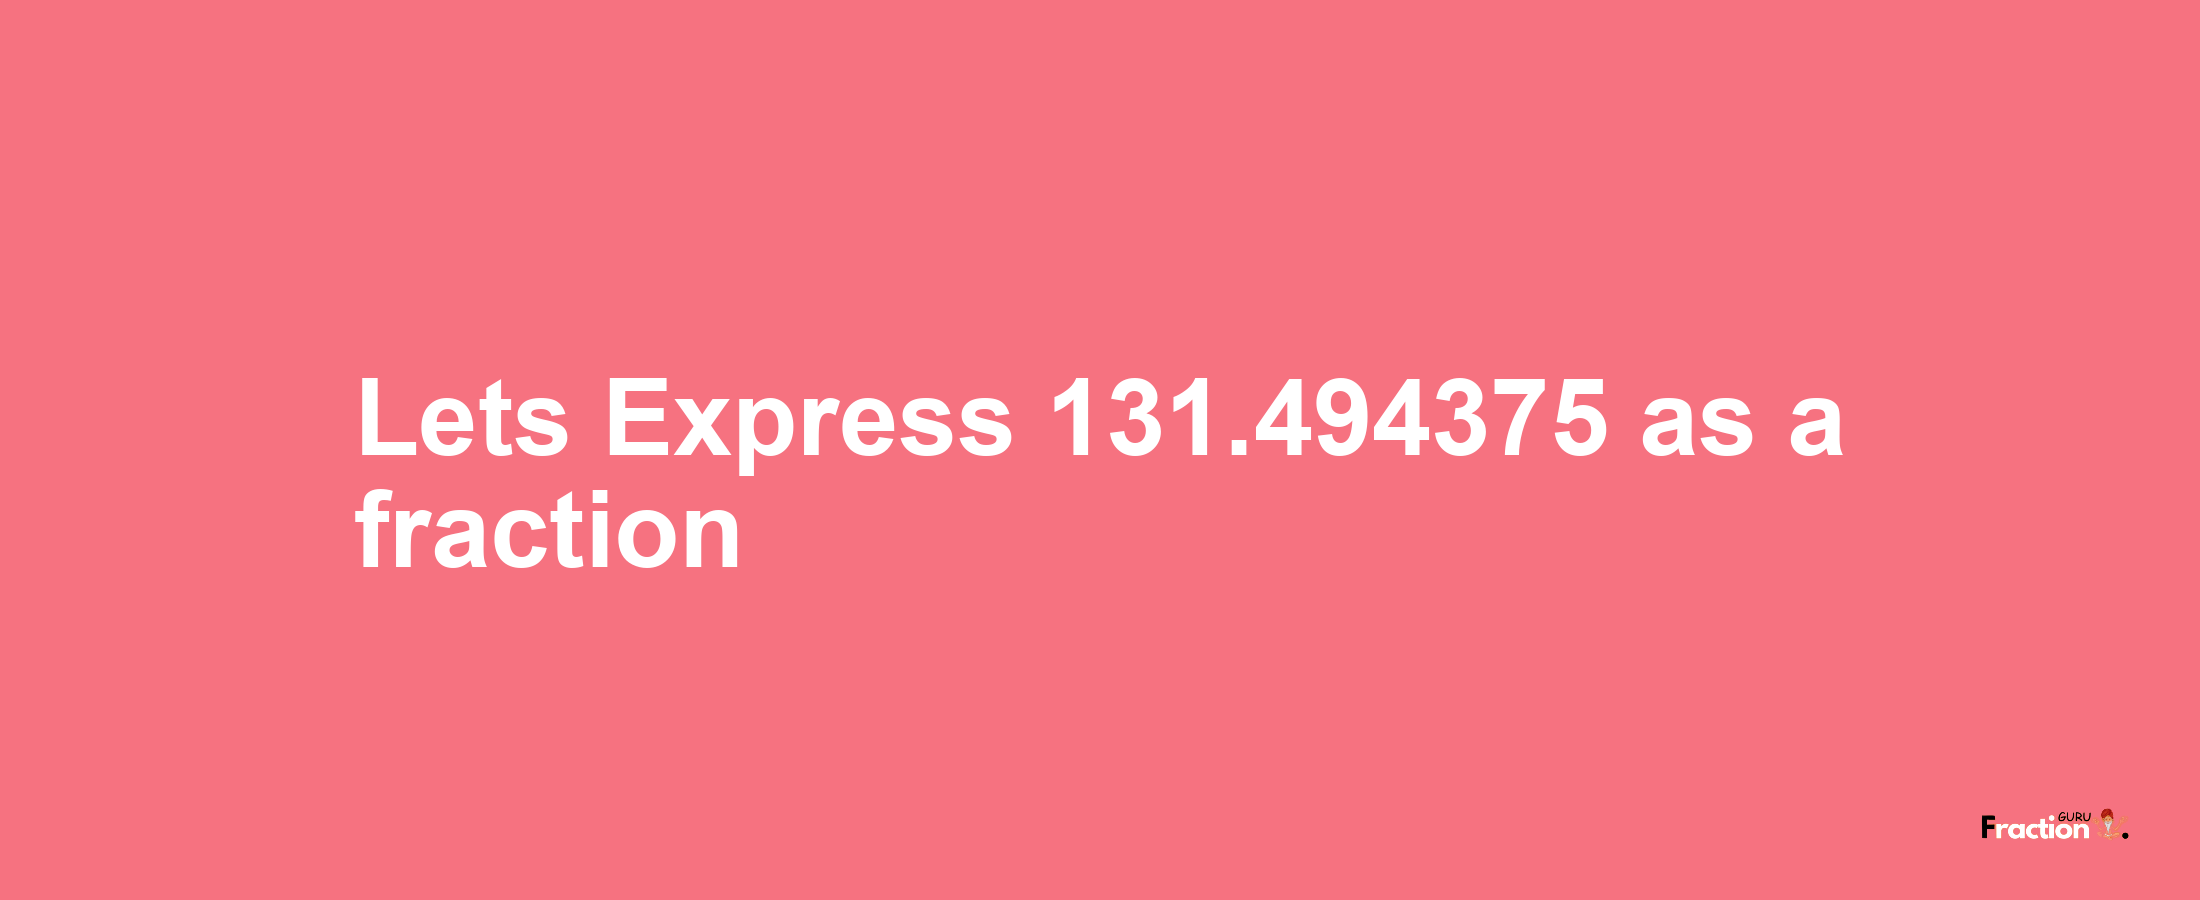 Lets Express 131.494375 as afraction